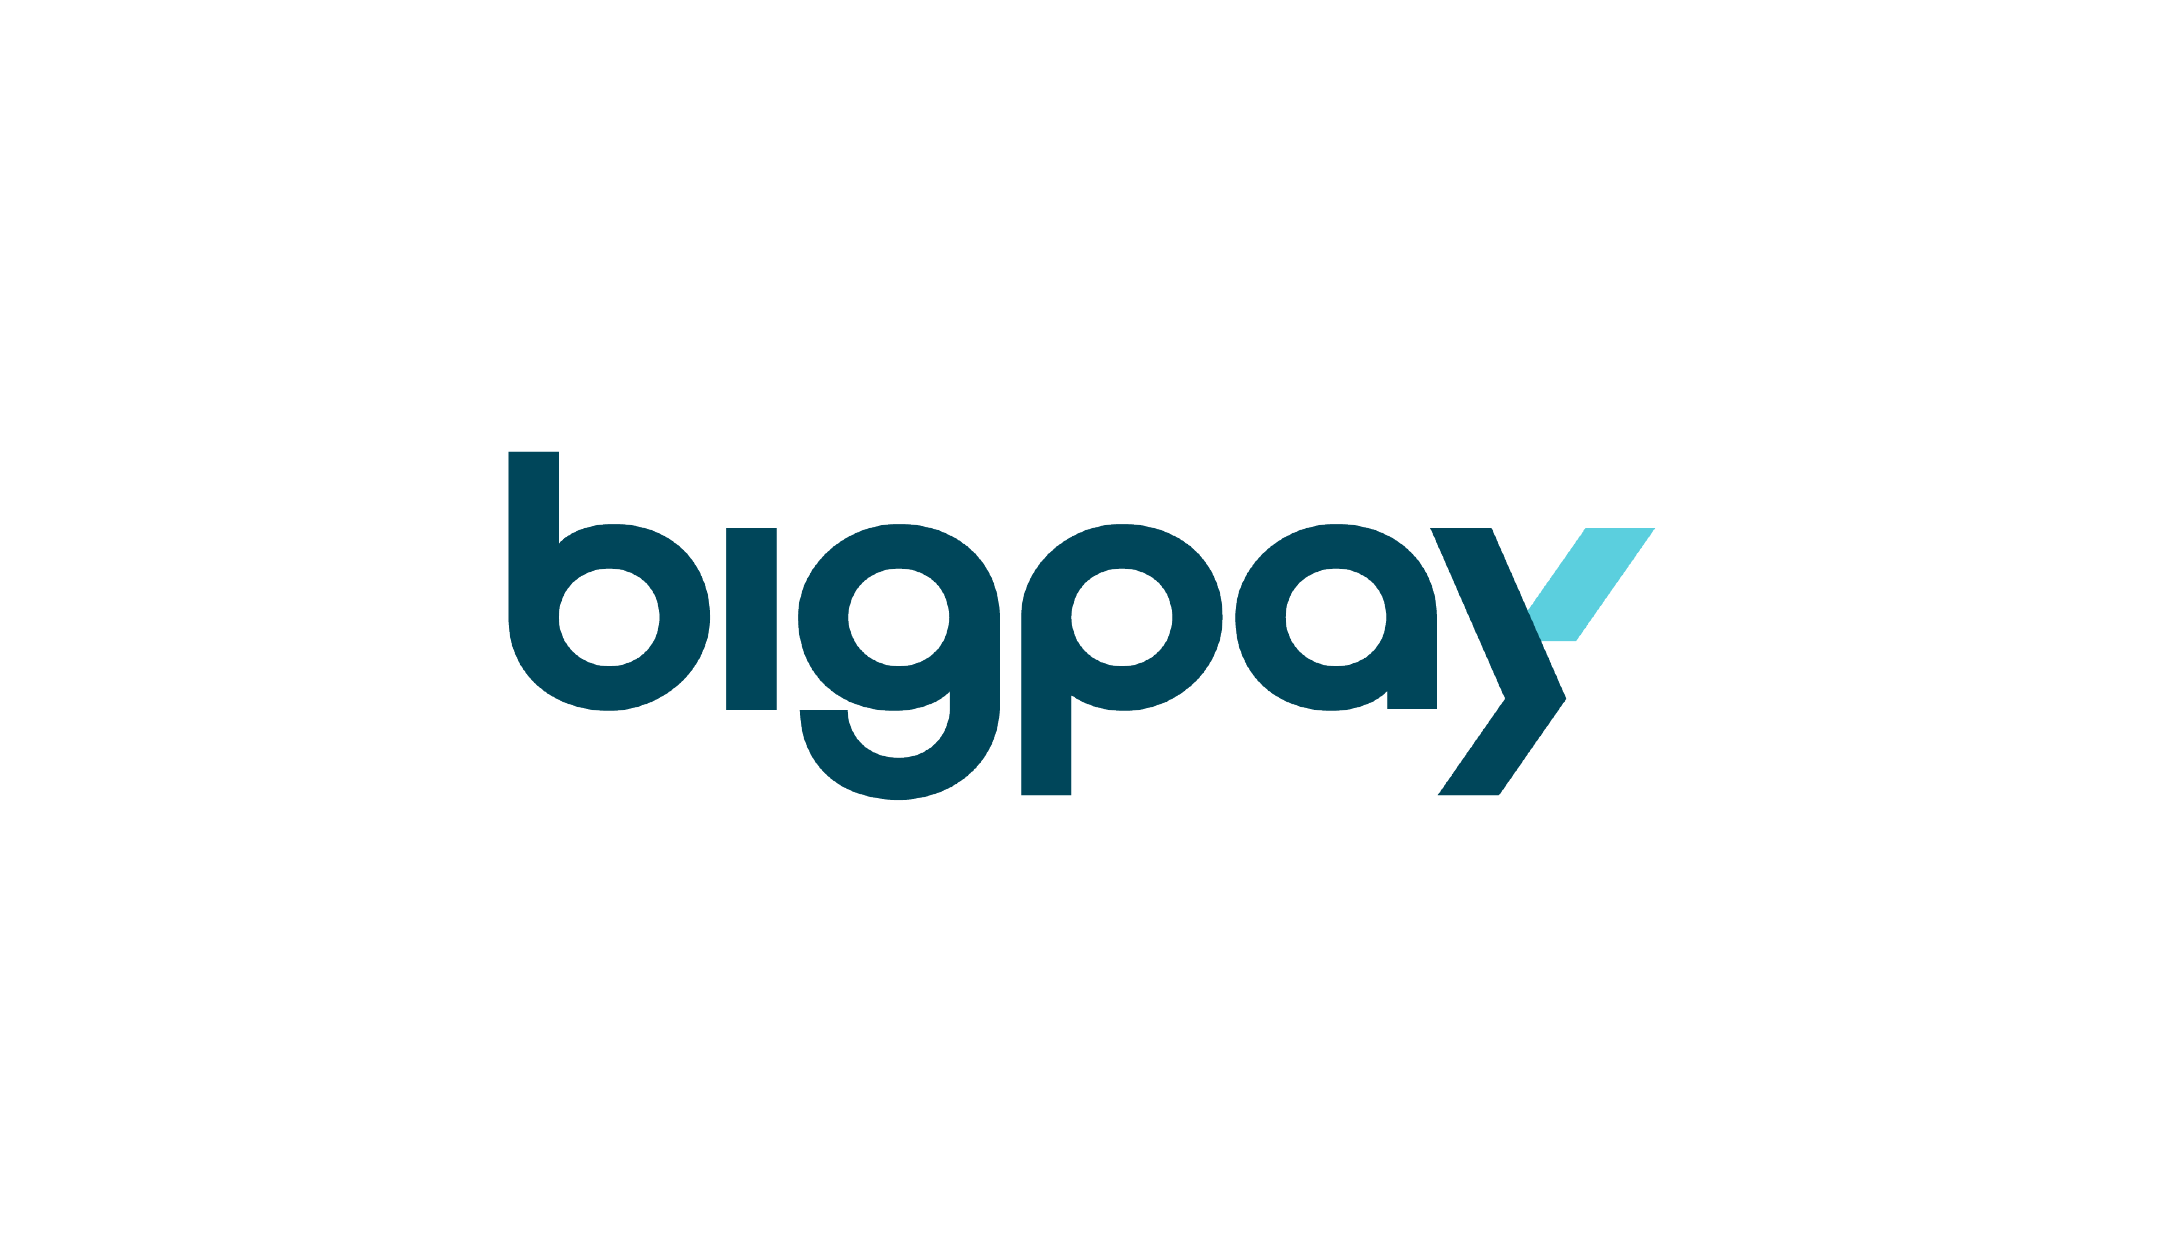 https://thaifintech.org/wp-content/uploads/2022/12/logo_Bigpay.png